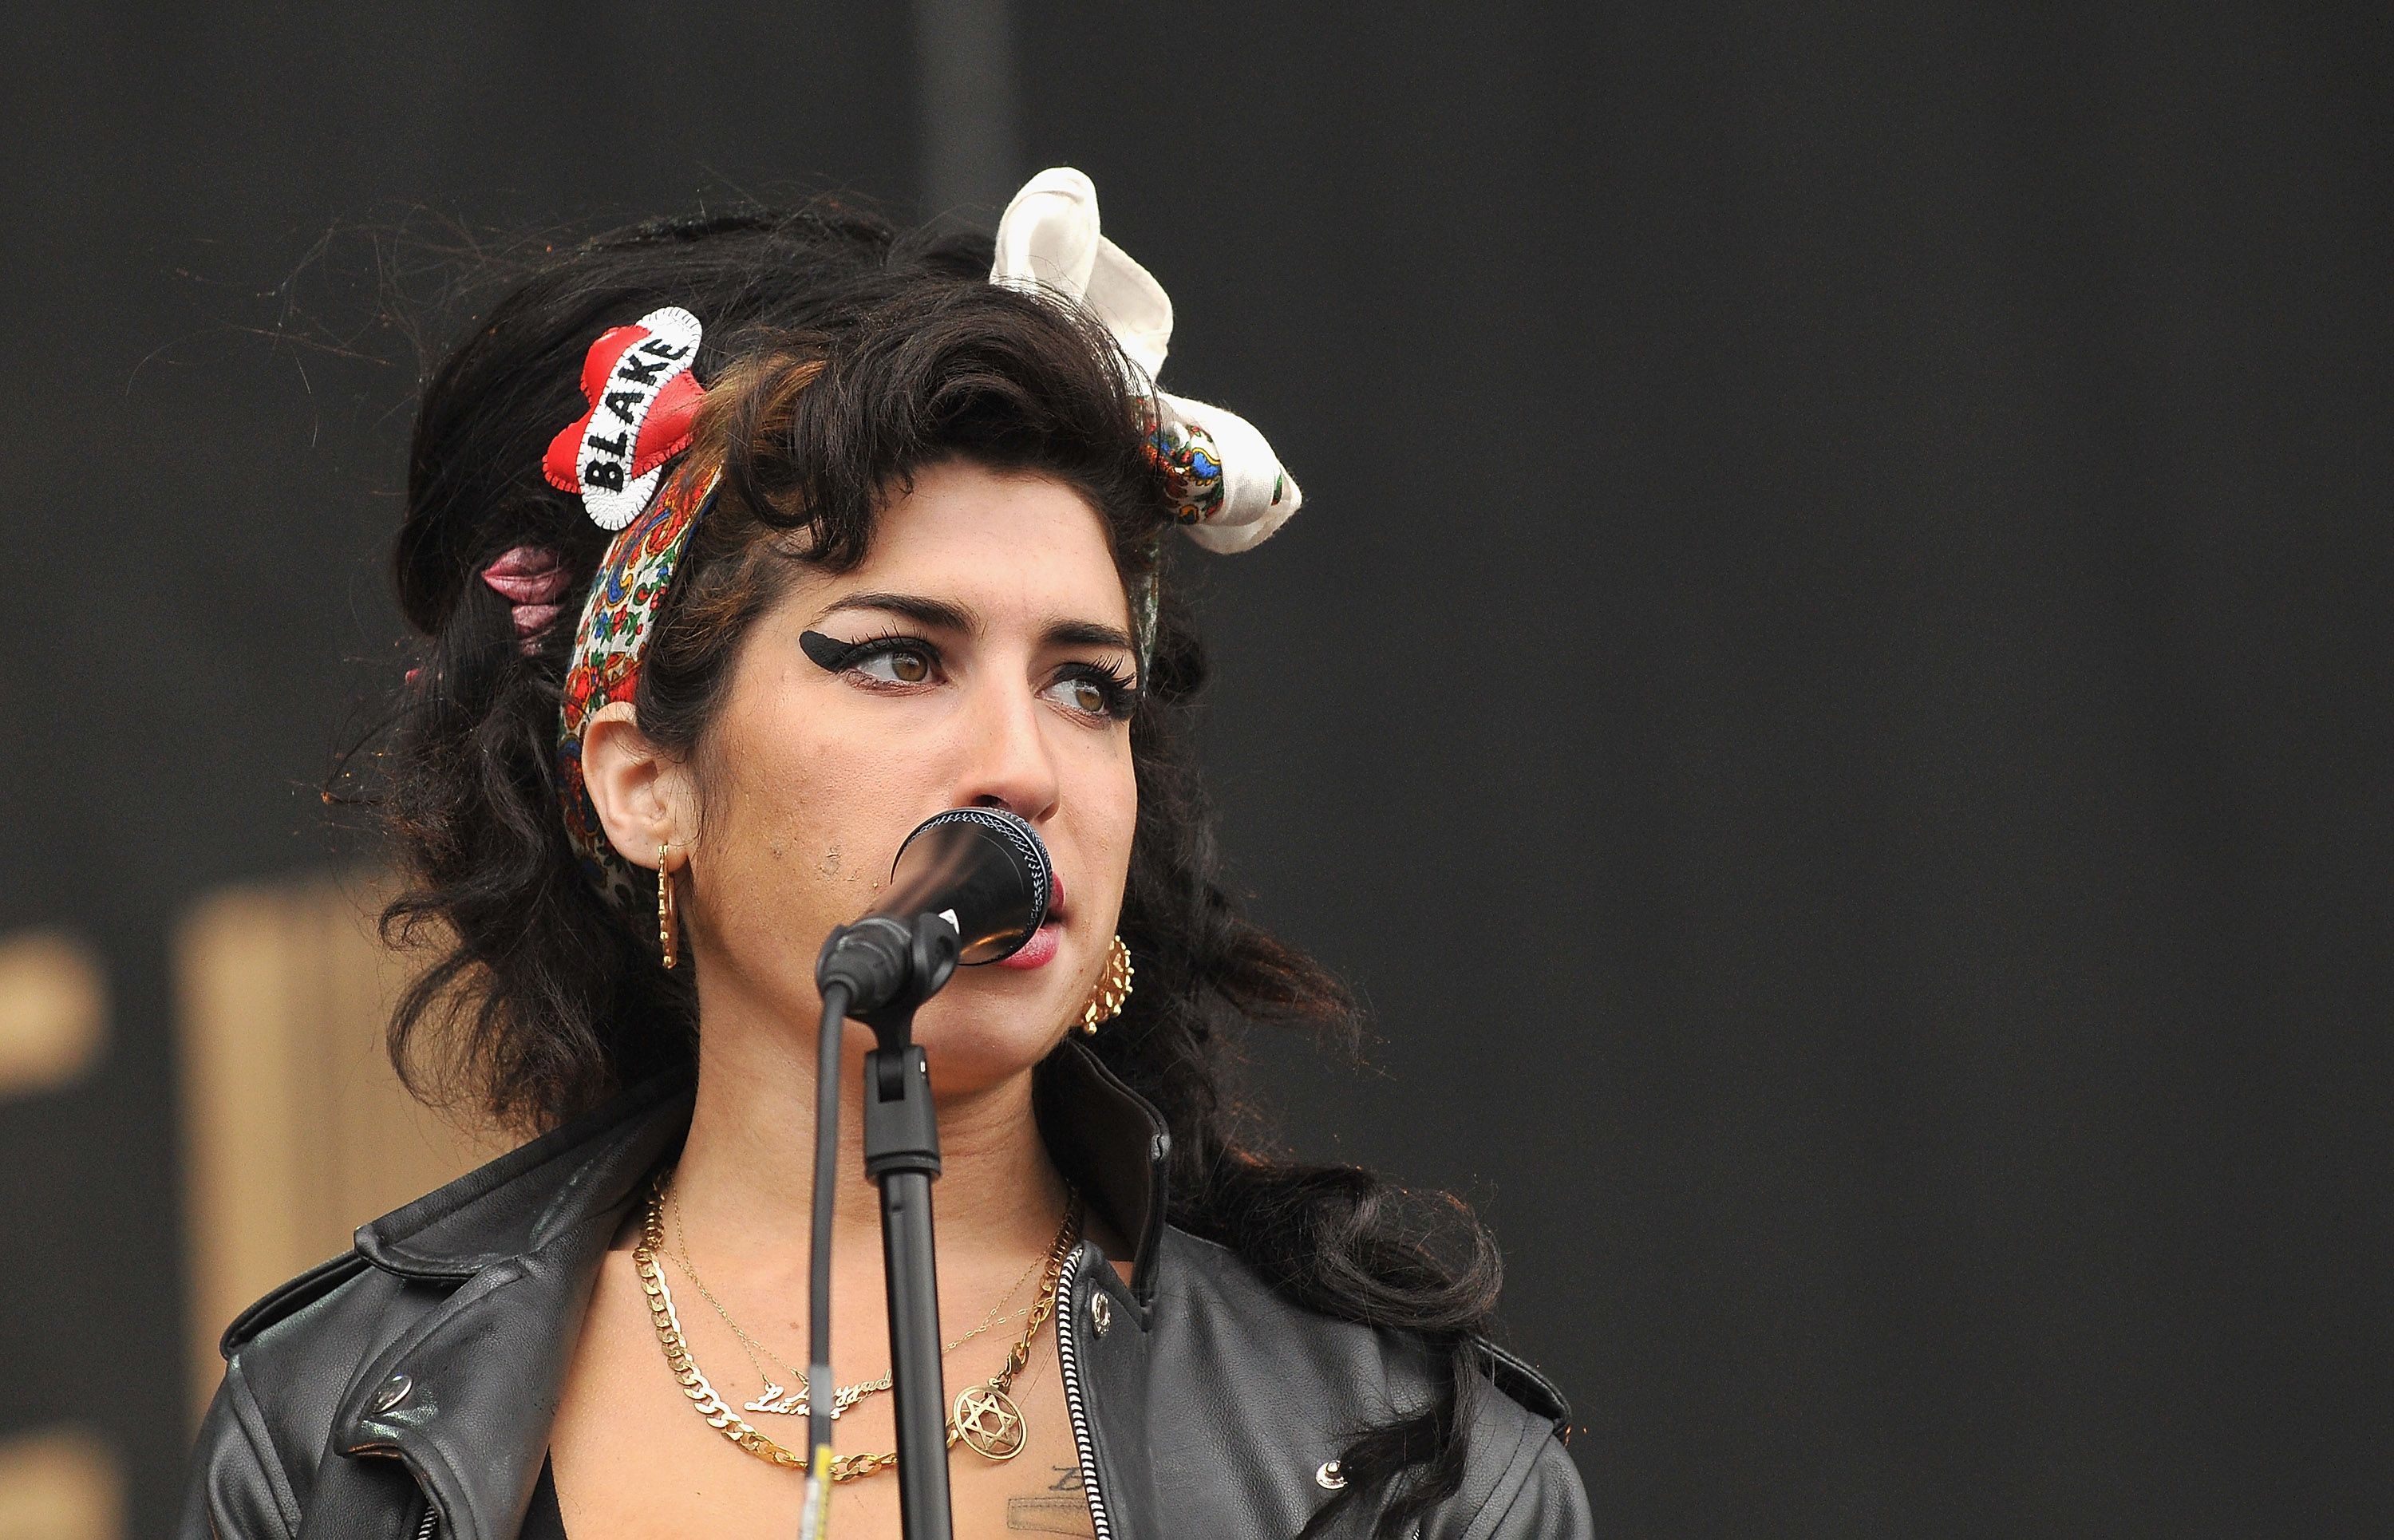 Amy Winehouse performing, with her signature beehive hairstyle and bold eyeliner